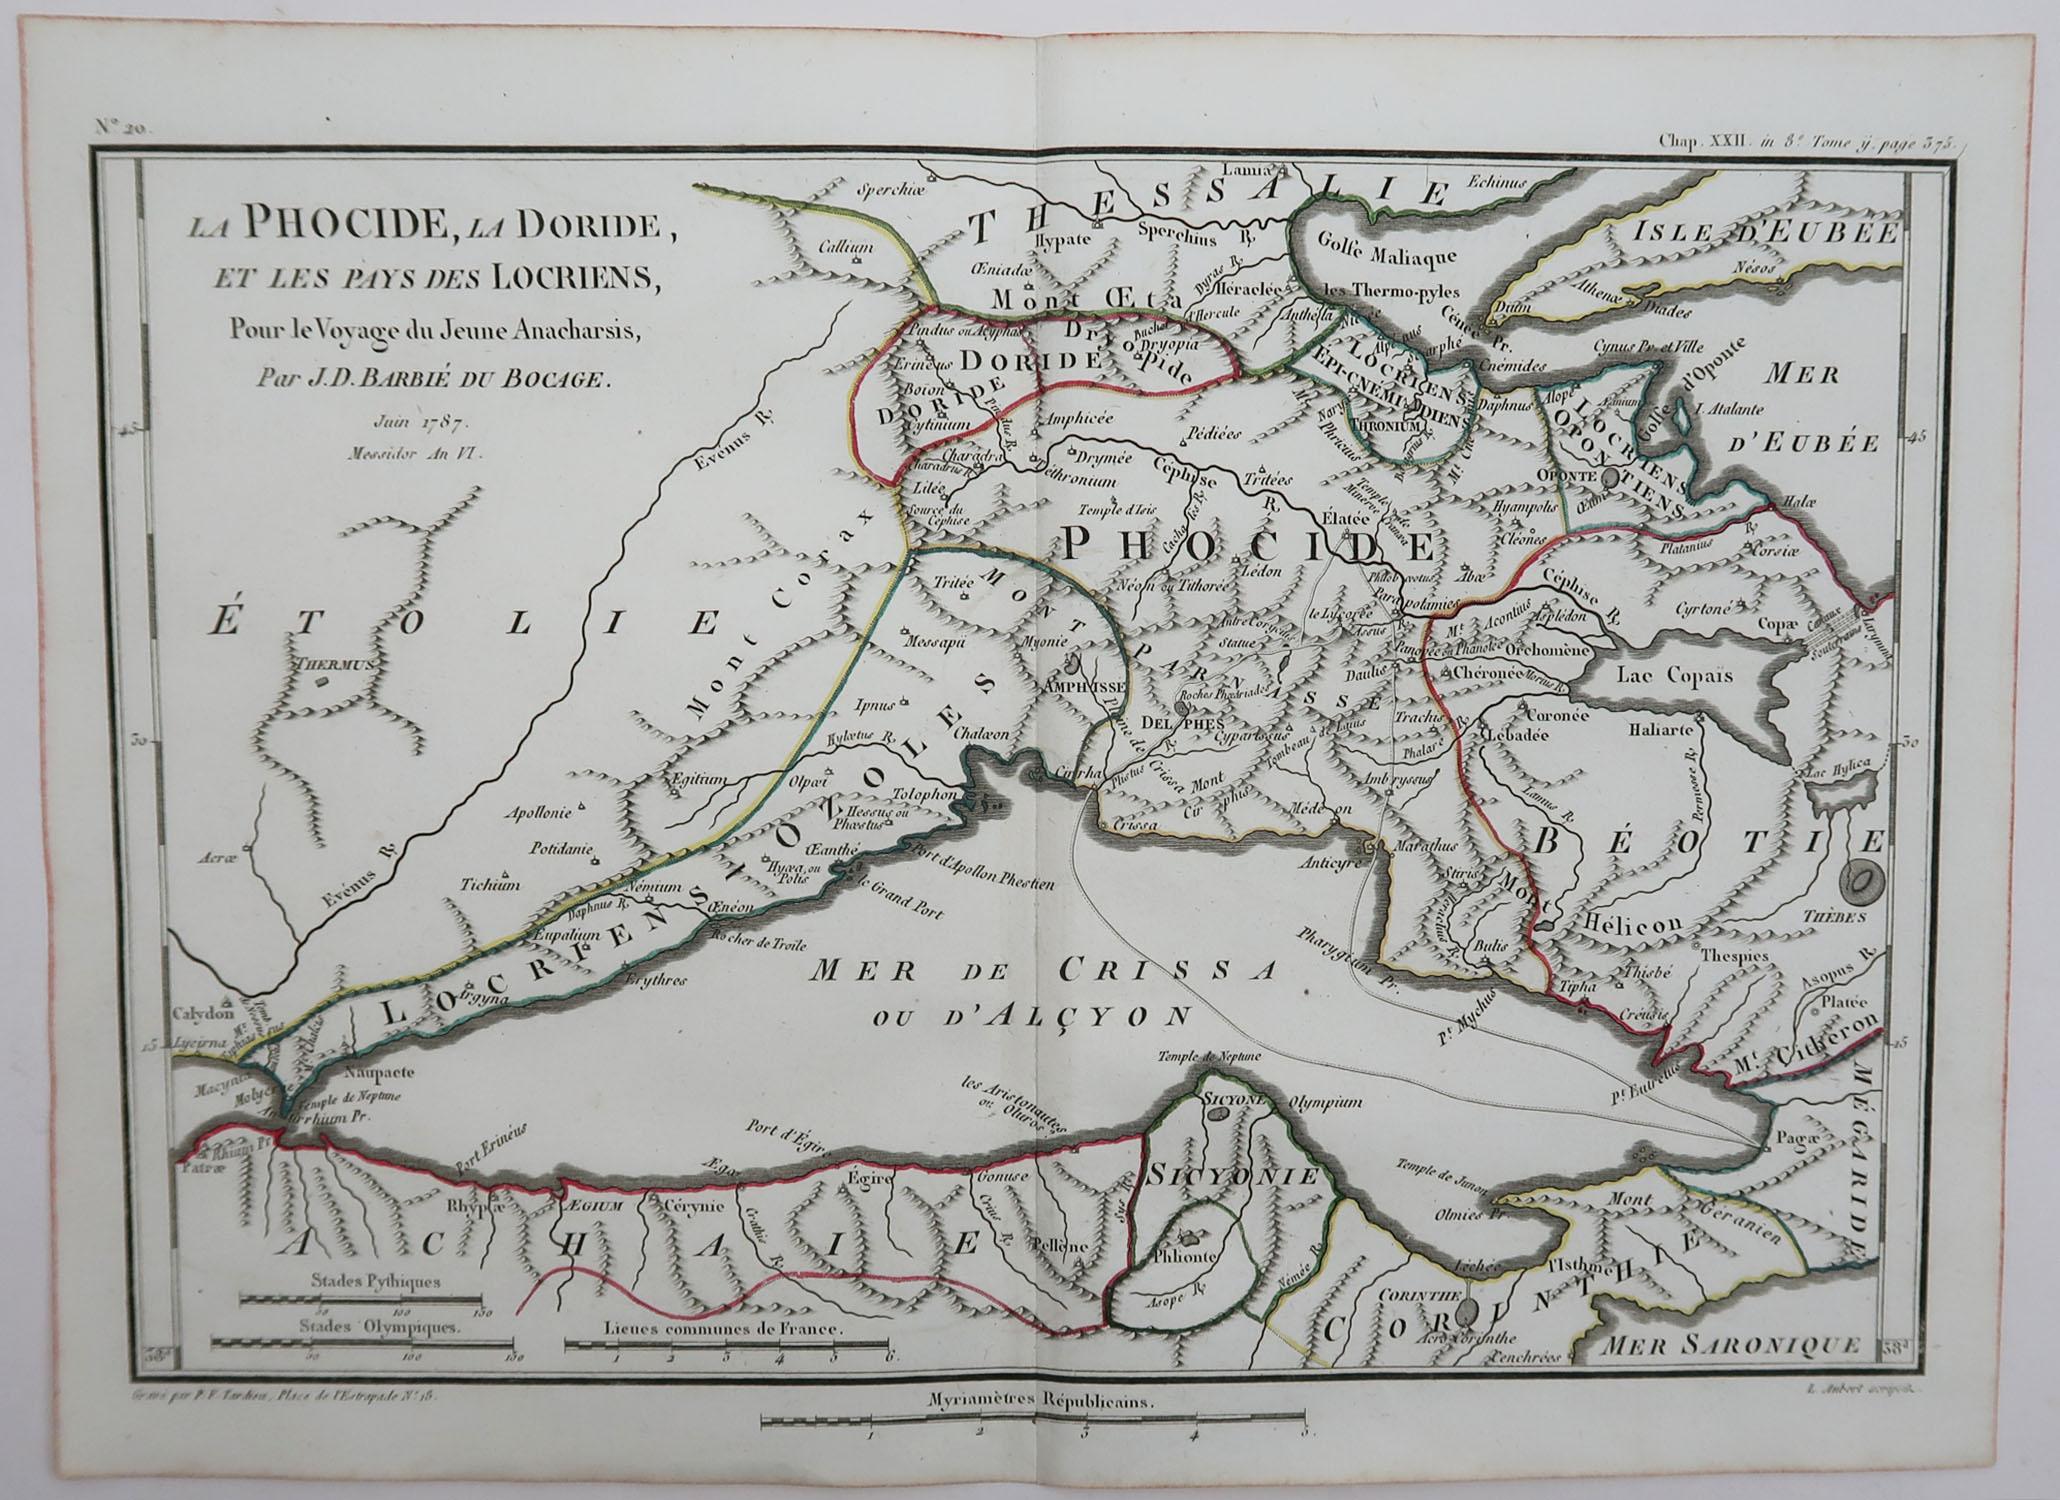 French Original Antique Map of Ancient Greece, Phocis, Gulf of Corinth, 1787